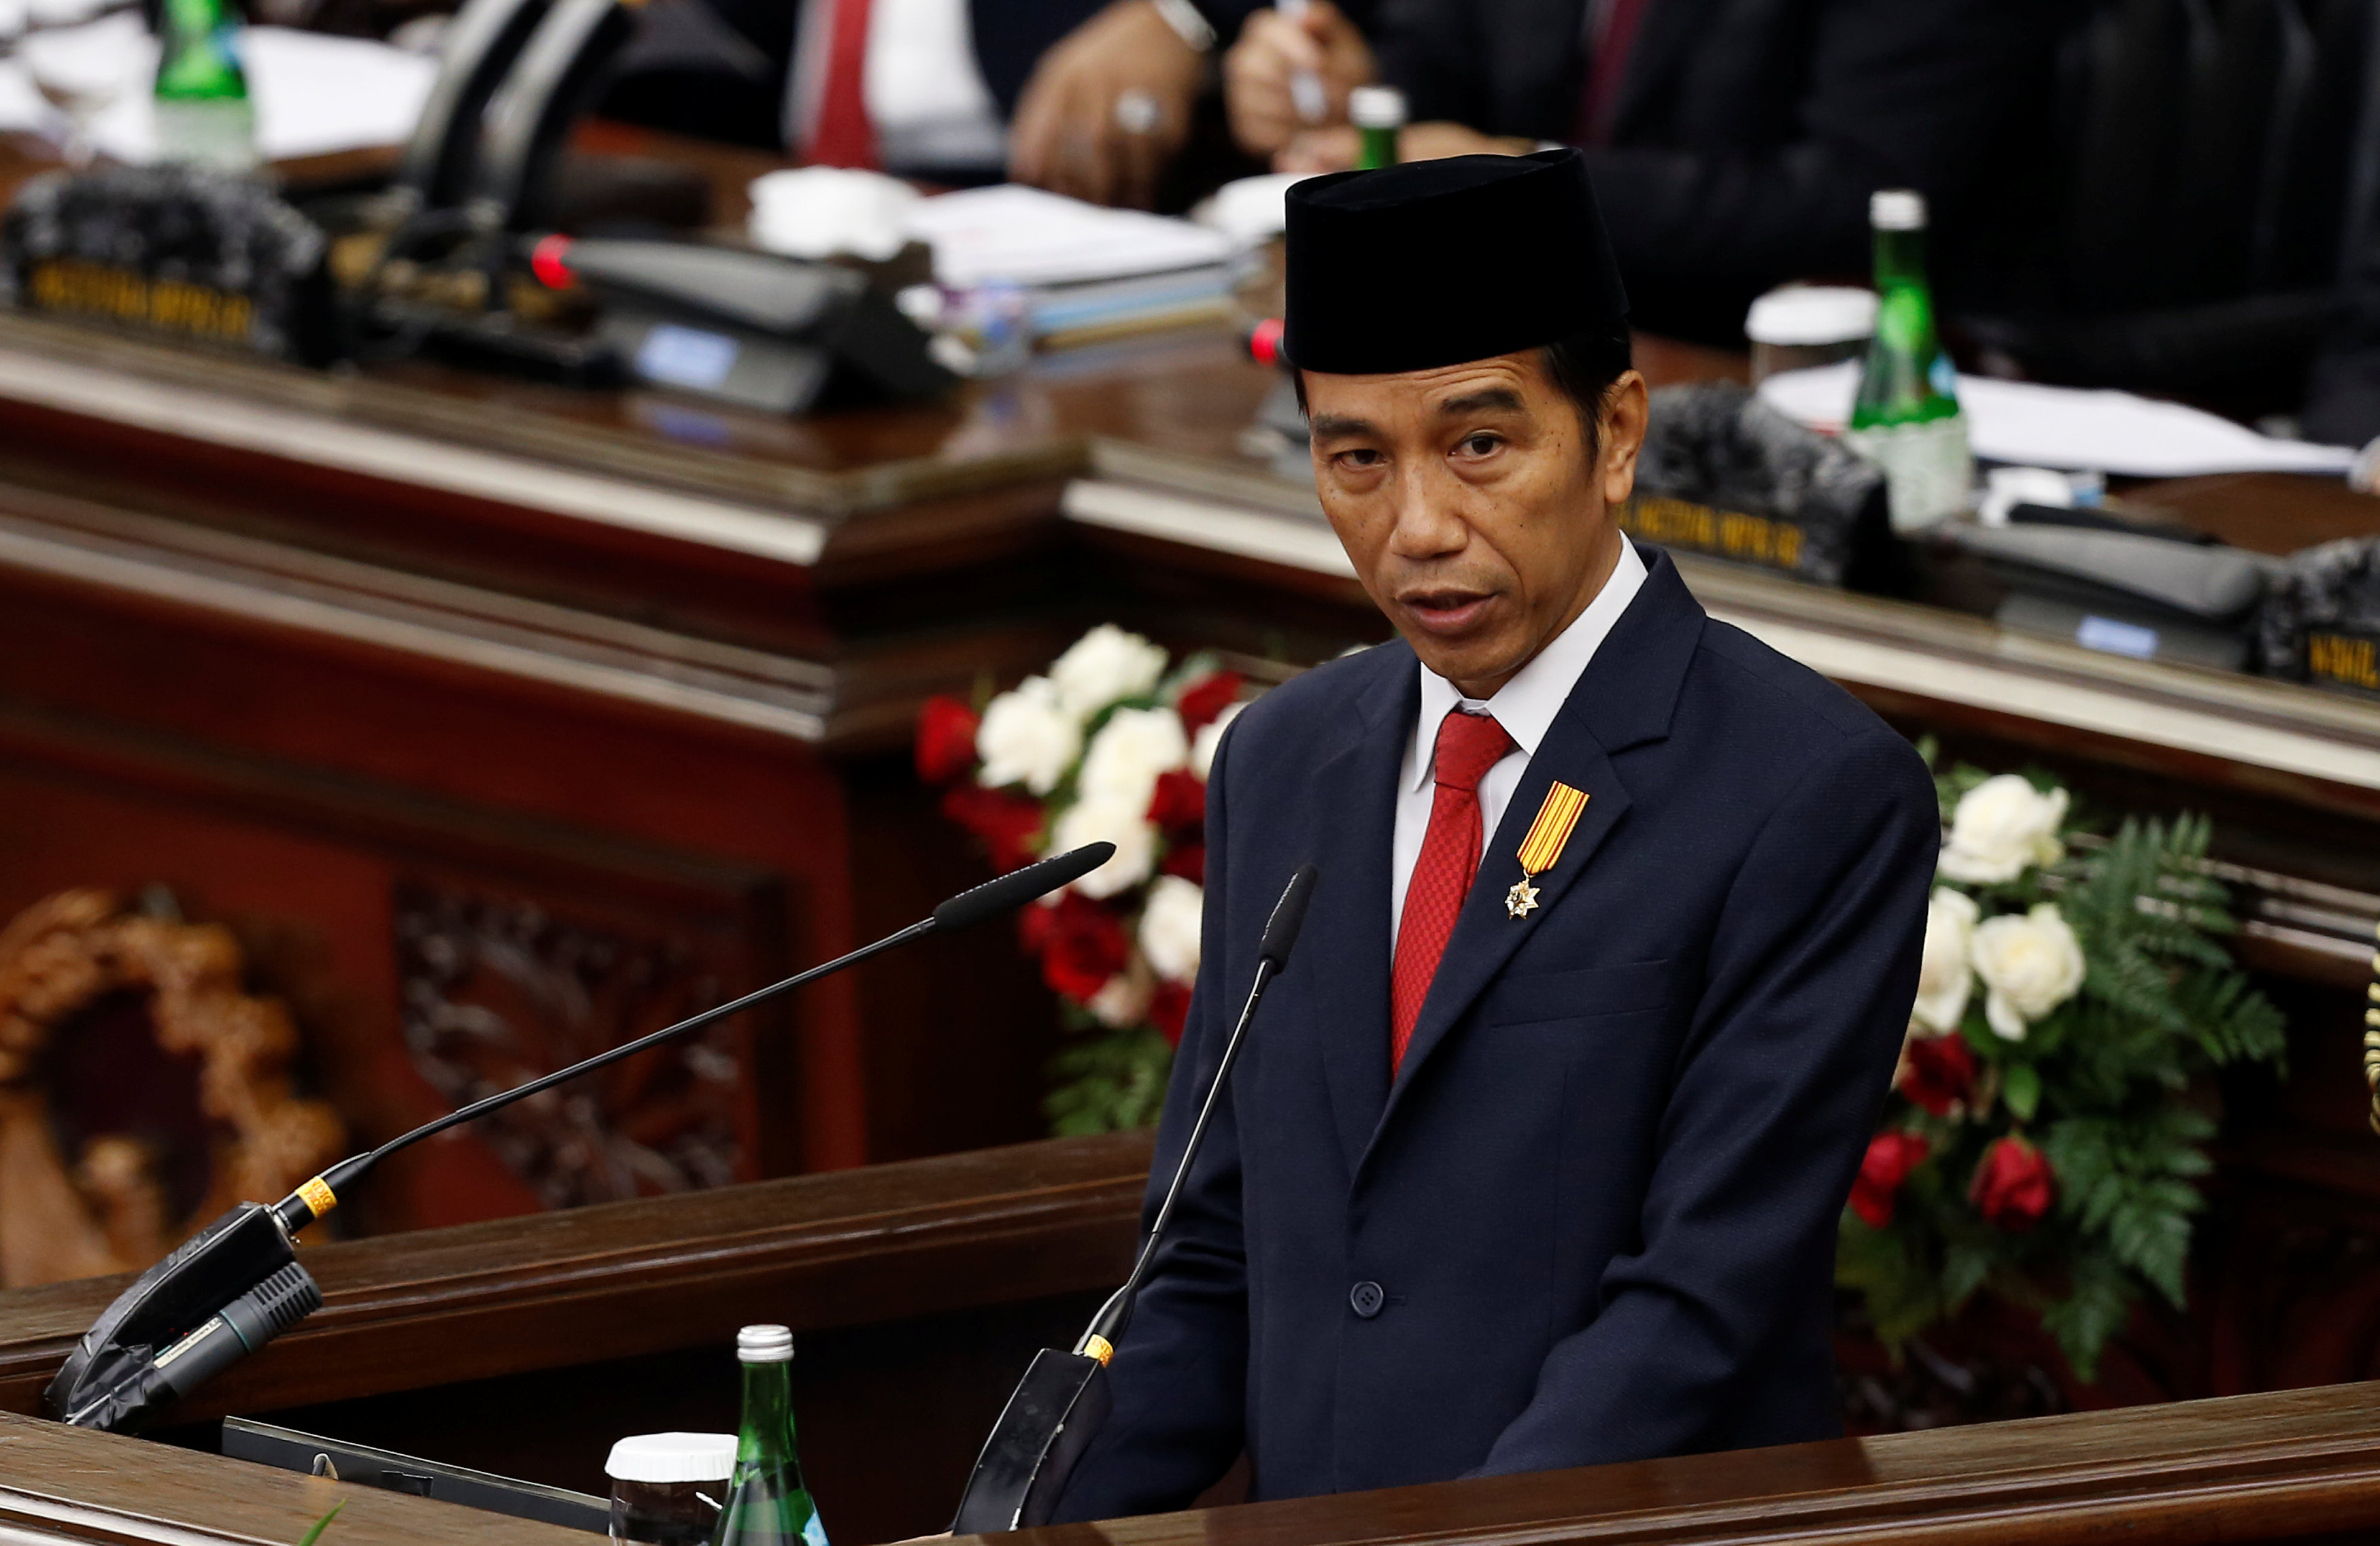 Indonesia's President Joko Widodo delivers a speech in front of parliament members at the House of Representative building in Jakarta, Indonesia, August 16, 2016. 